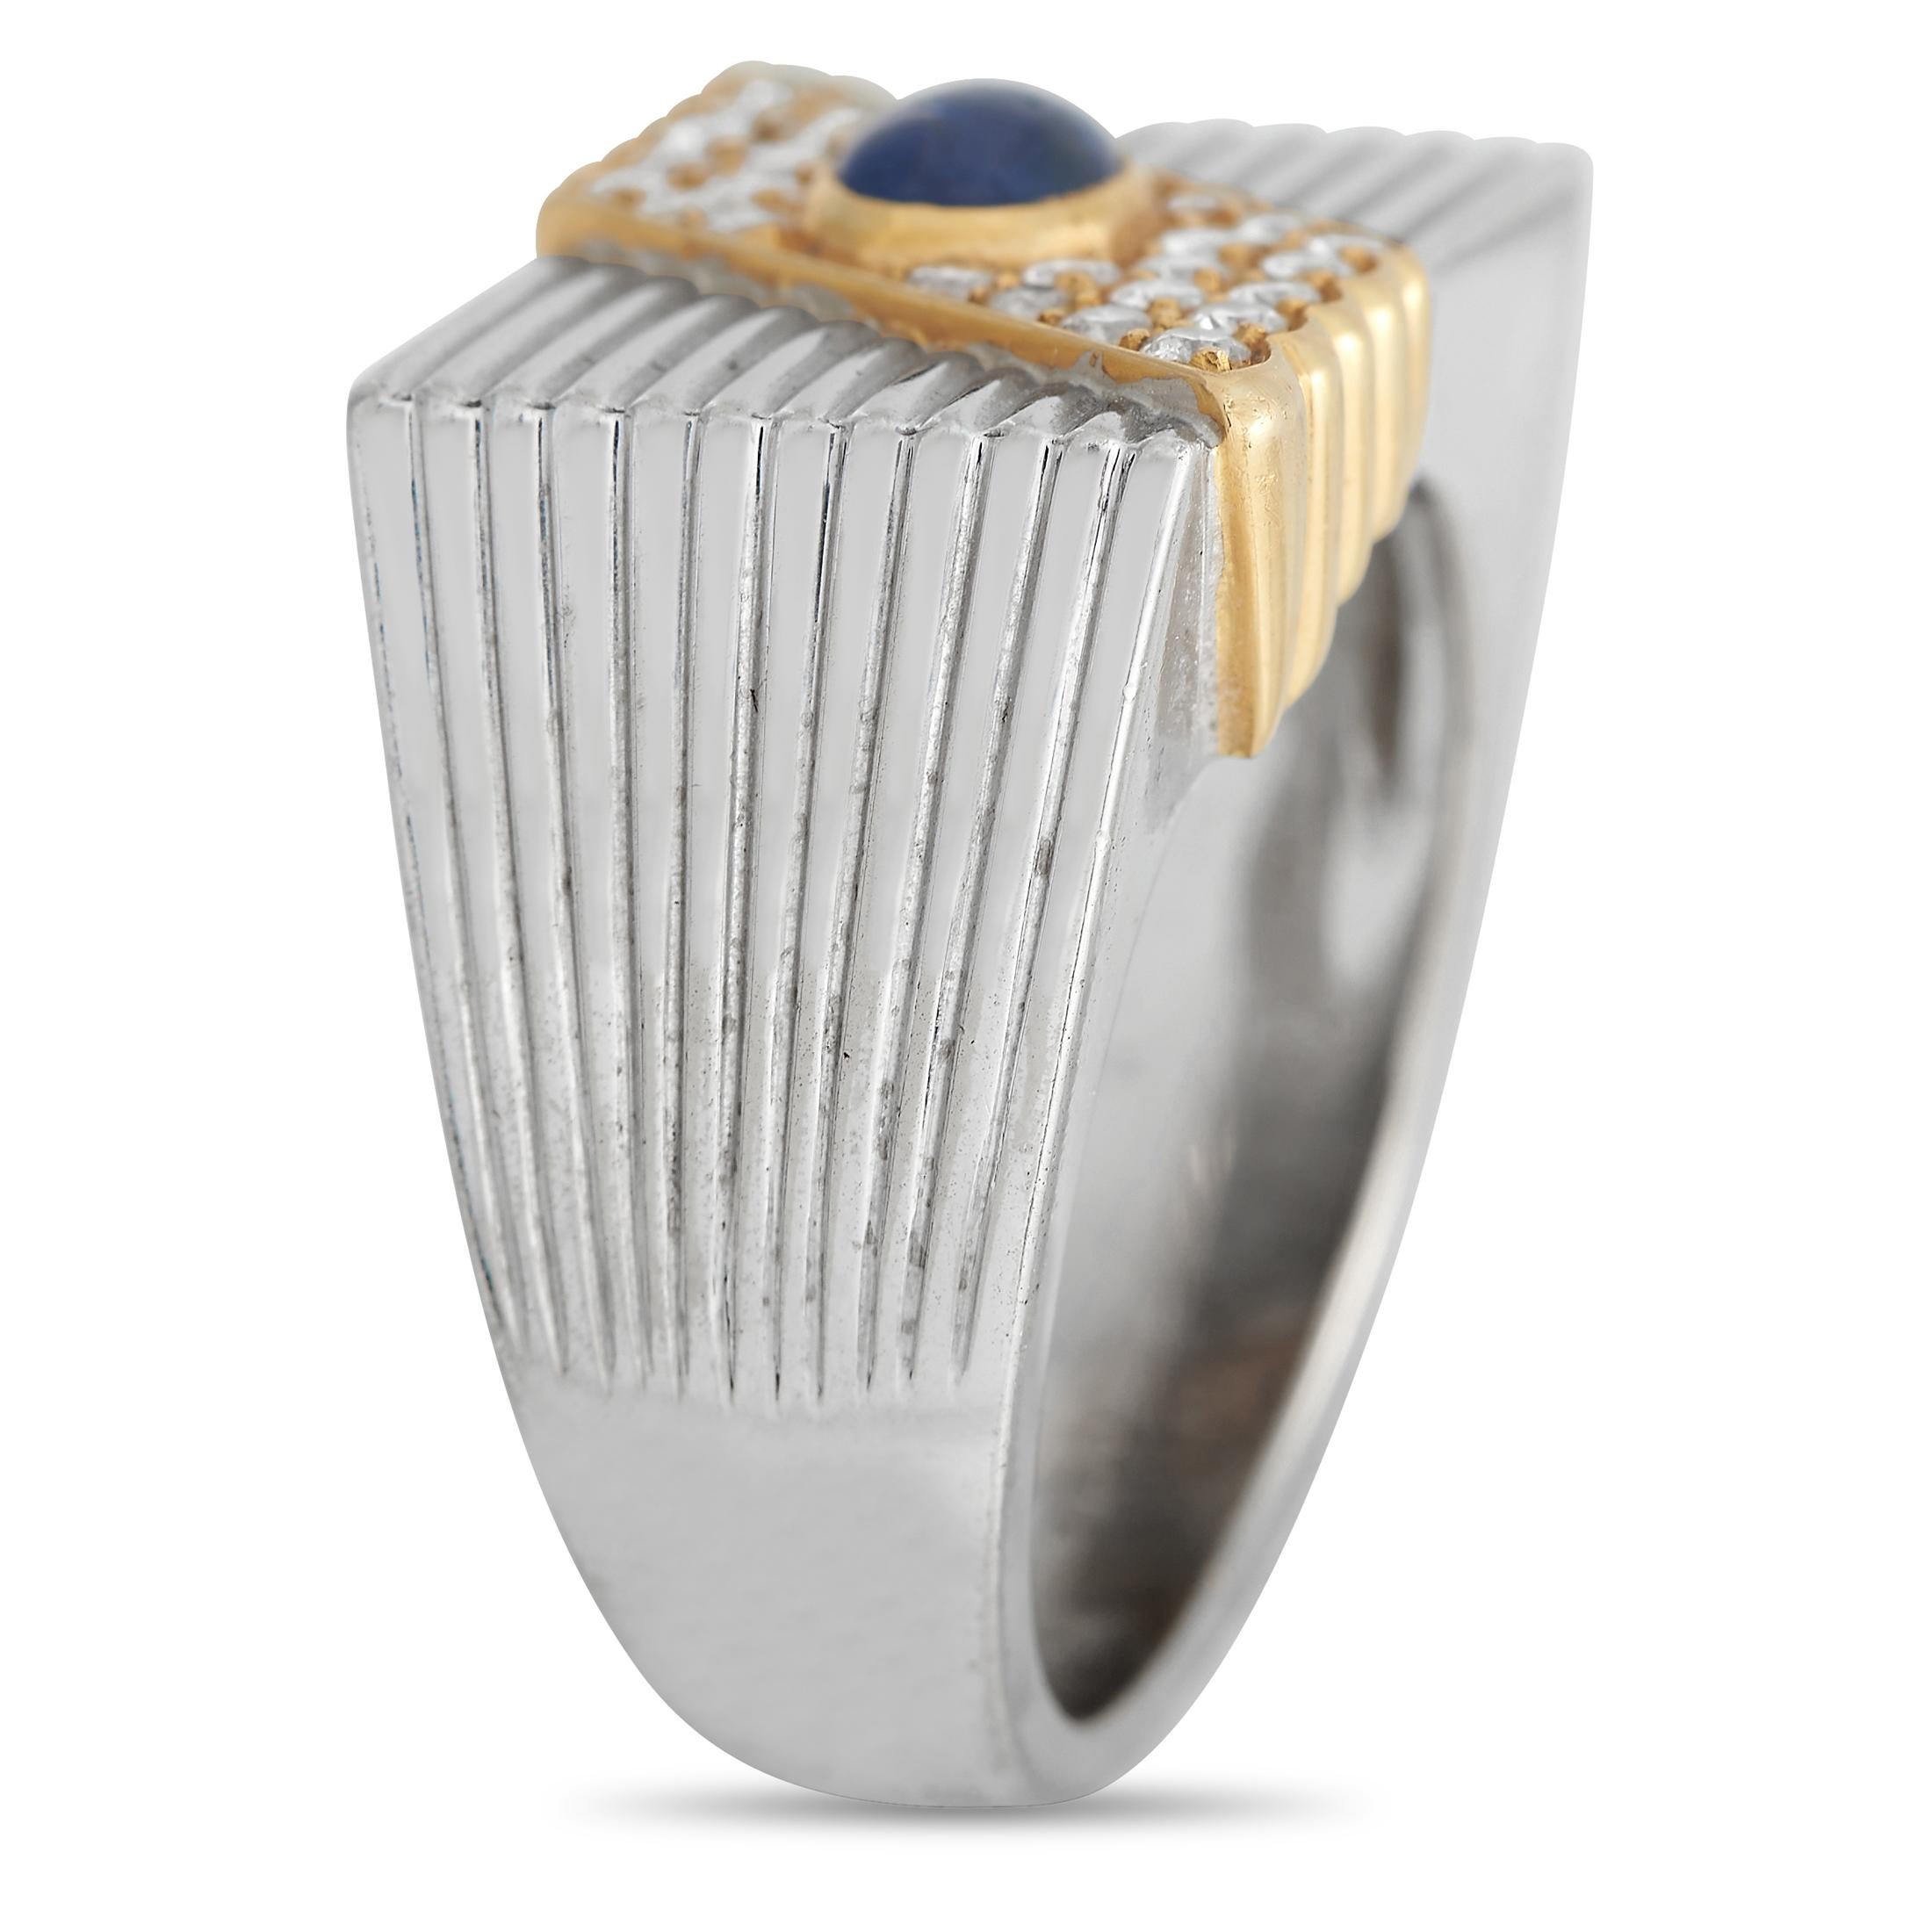 Your jewelry collection won't be complete without an attention-grabbing ring like this two-toned beauty from Piaget. This striking jewel features a white gold square shank with ridged or fluted detail. The flat top bears a diagonal bar in 18K yellow